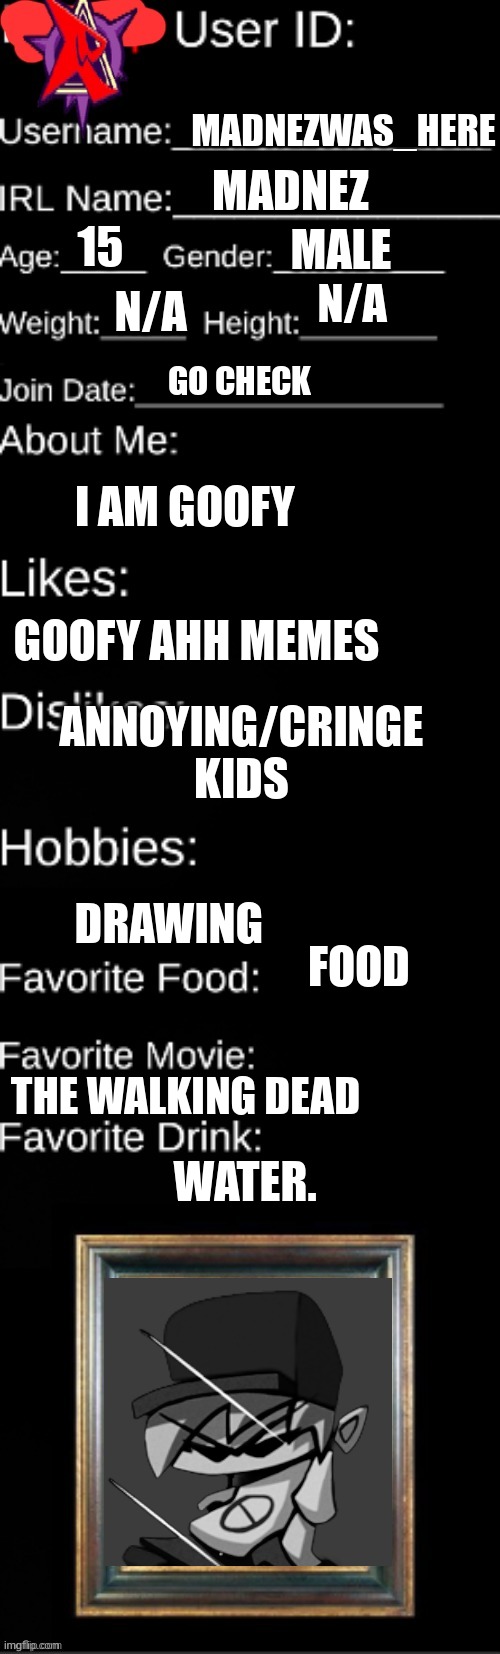 me. | MADNEZWAS_HERE; MADNEZ; MALE; 15; N/A; N/A; GO CHECK; I AM GOOFY; GOOFY AHH MEMES; ANNOYING/CRINGE KIDS; DRAWING; FOOD; WATER. THE WALKING DEAD | image tagged in official agl id | made w/ Imgflip meme maker